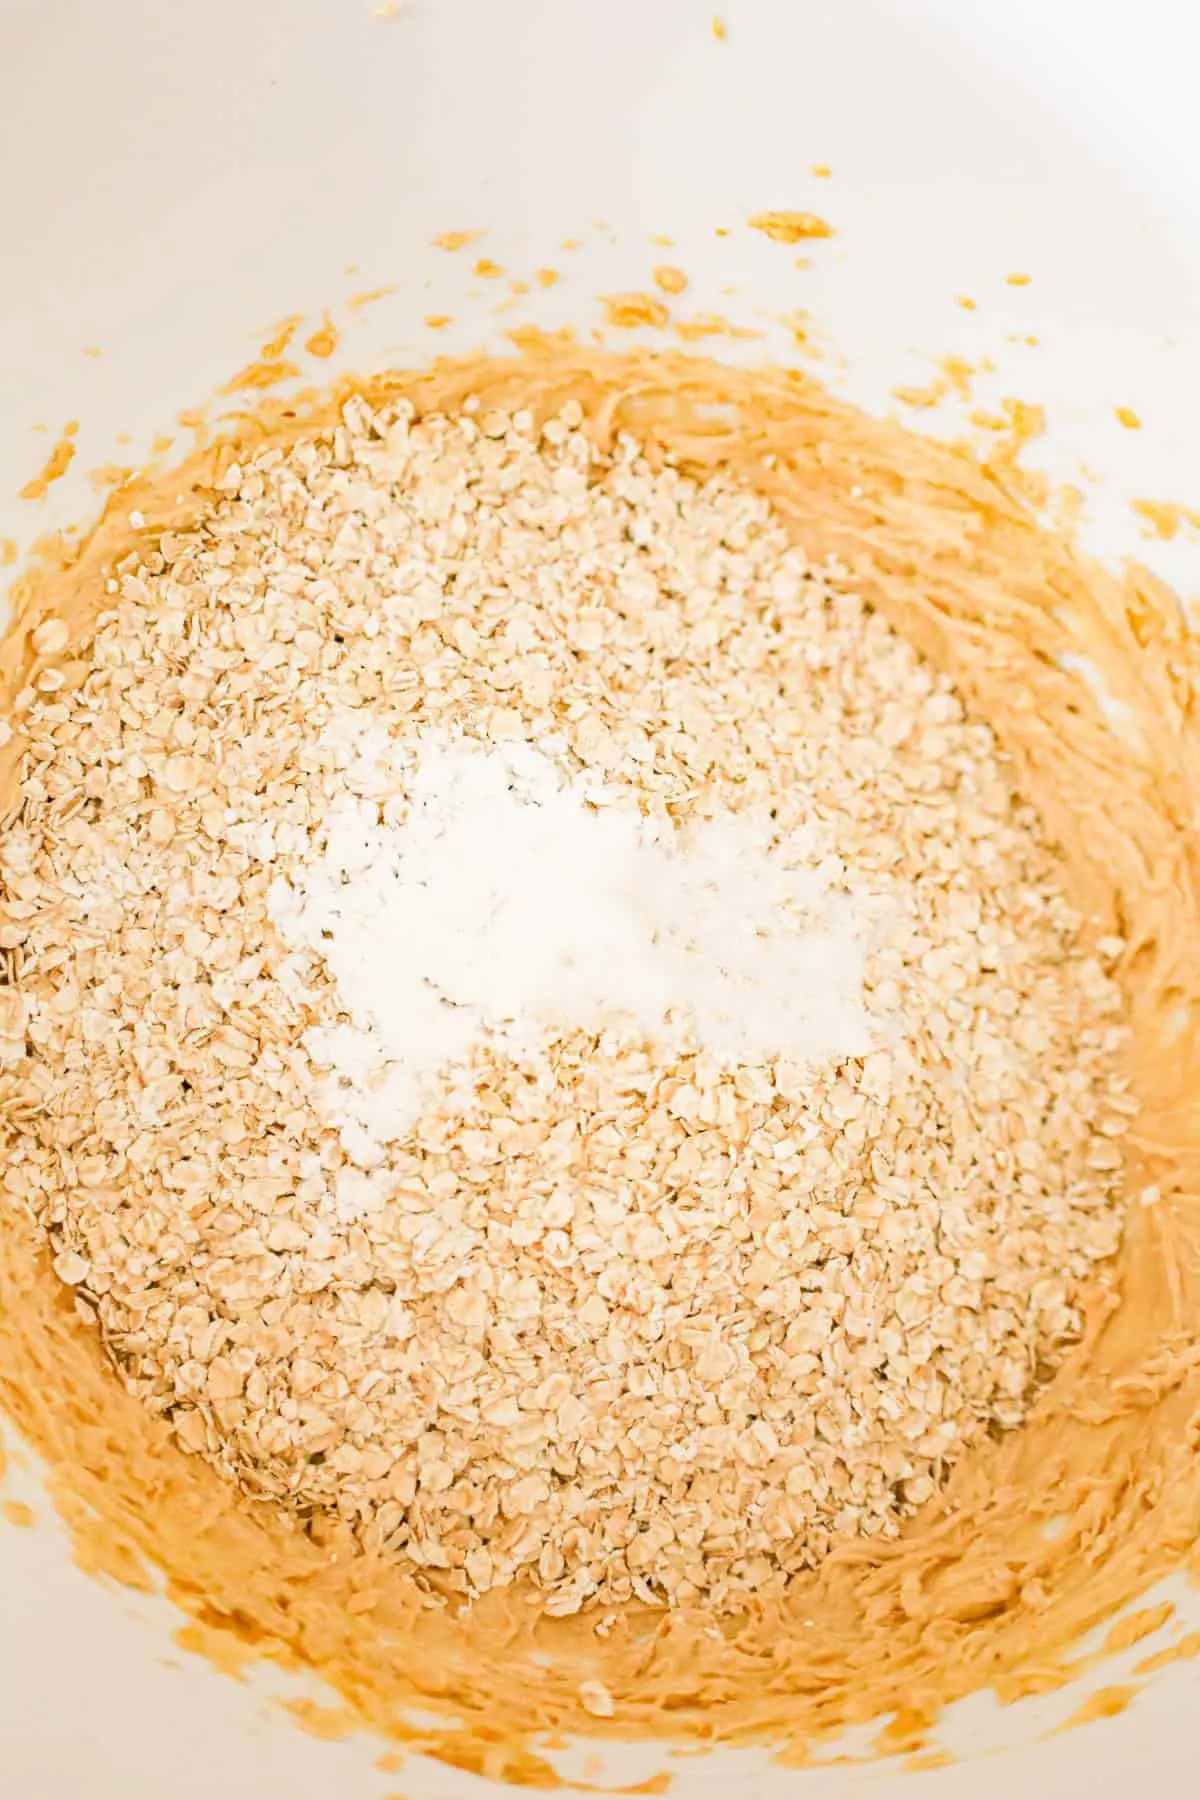 baking powder, salt and quick oats on top of creamy peanut butter mixture in a mixing bowl